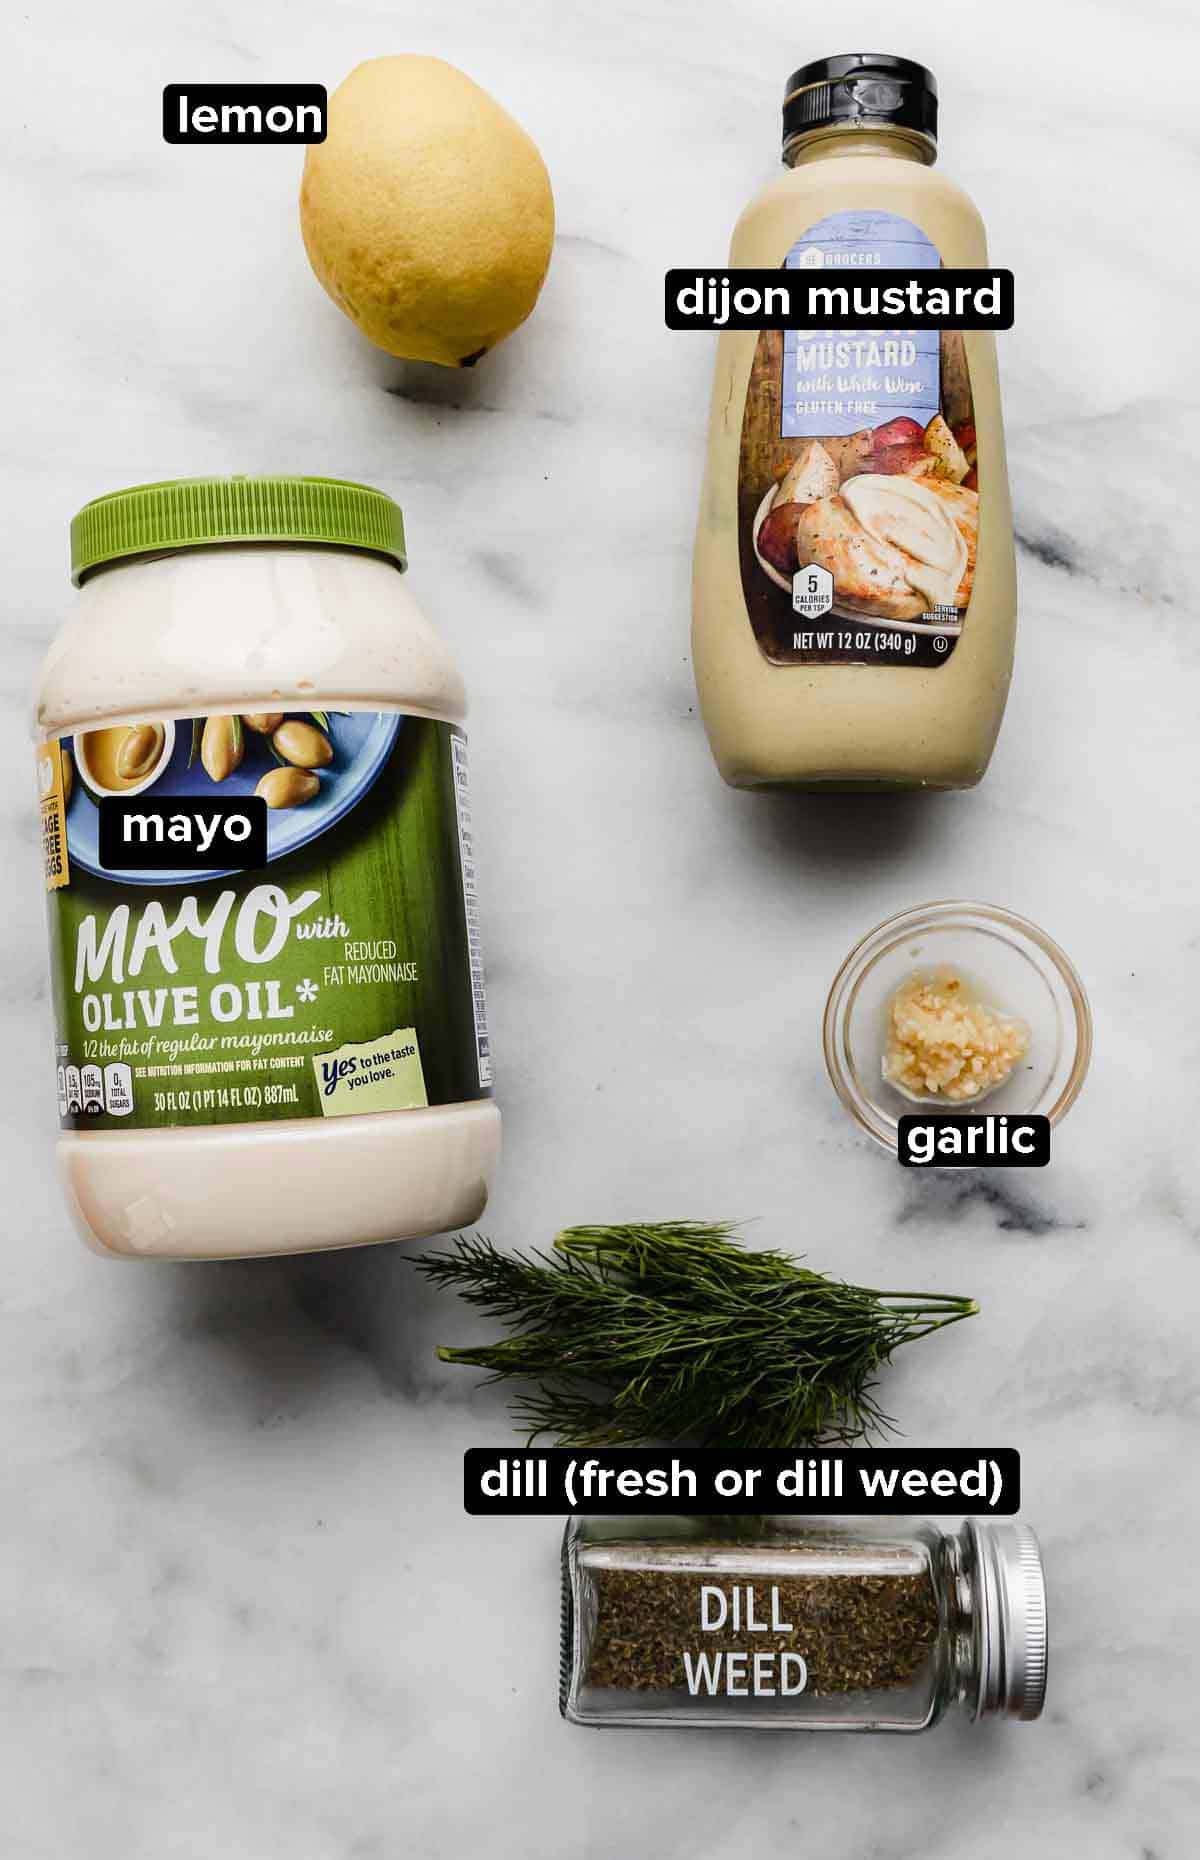 Mayo, dijon mustard, dill, garlic on a white background; these are the ingredients used to make a dill sauce for salmon burgers.